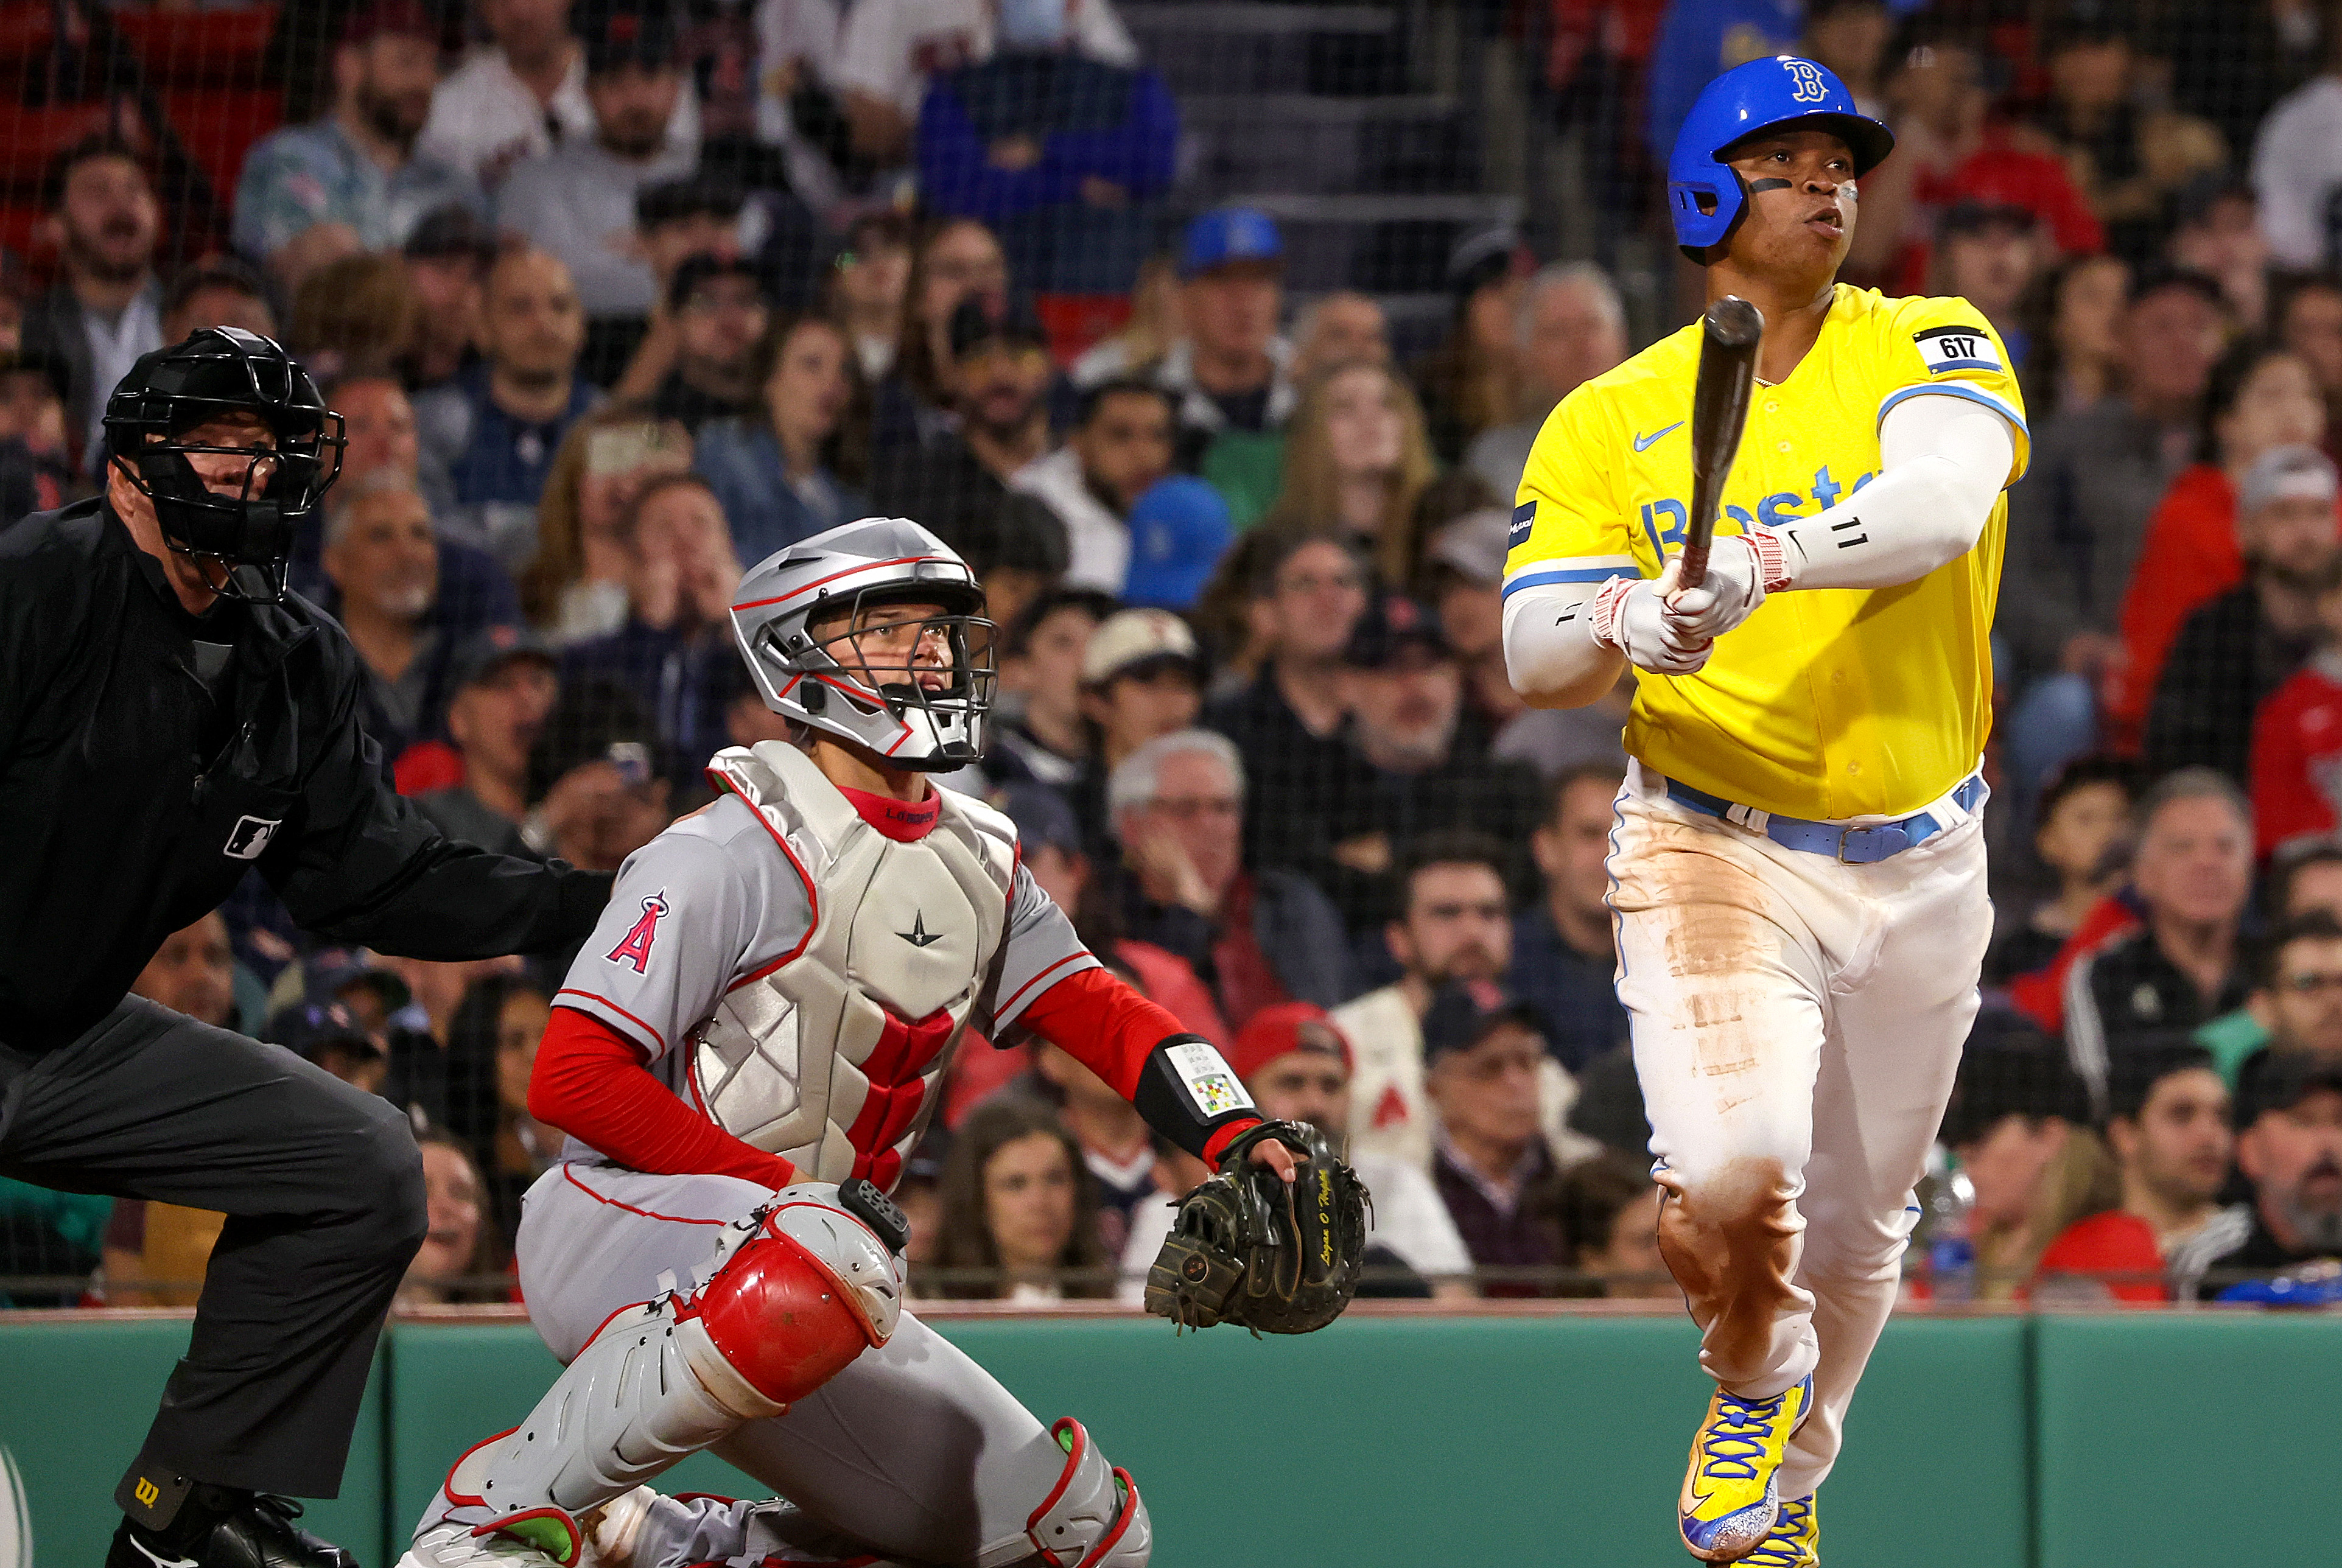 Why was Rafael Devers thrown off his game in 2020? - The Boston Globe